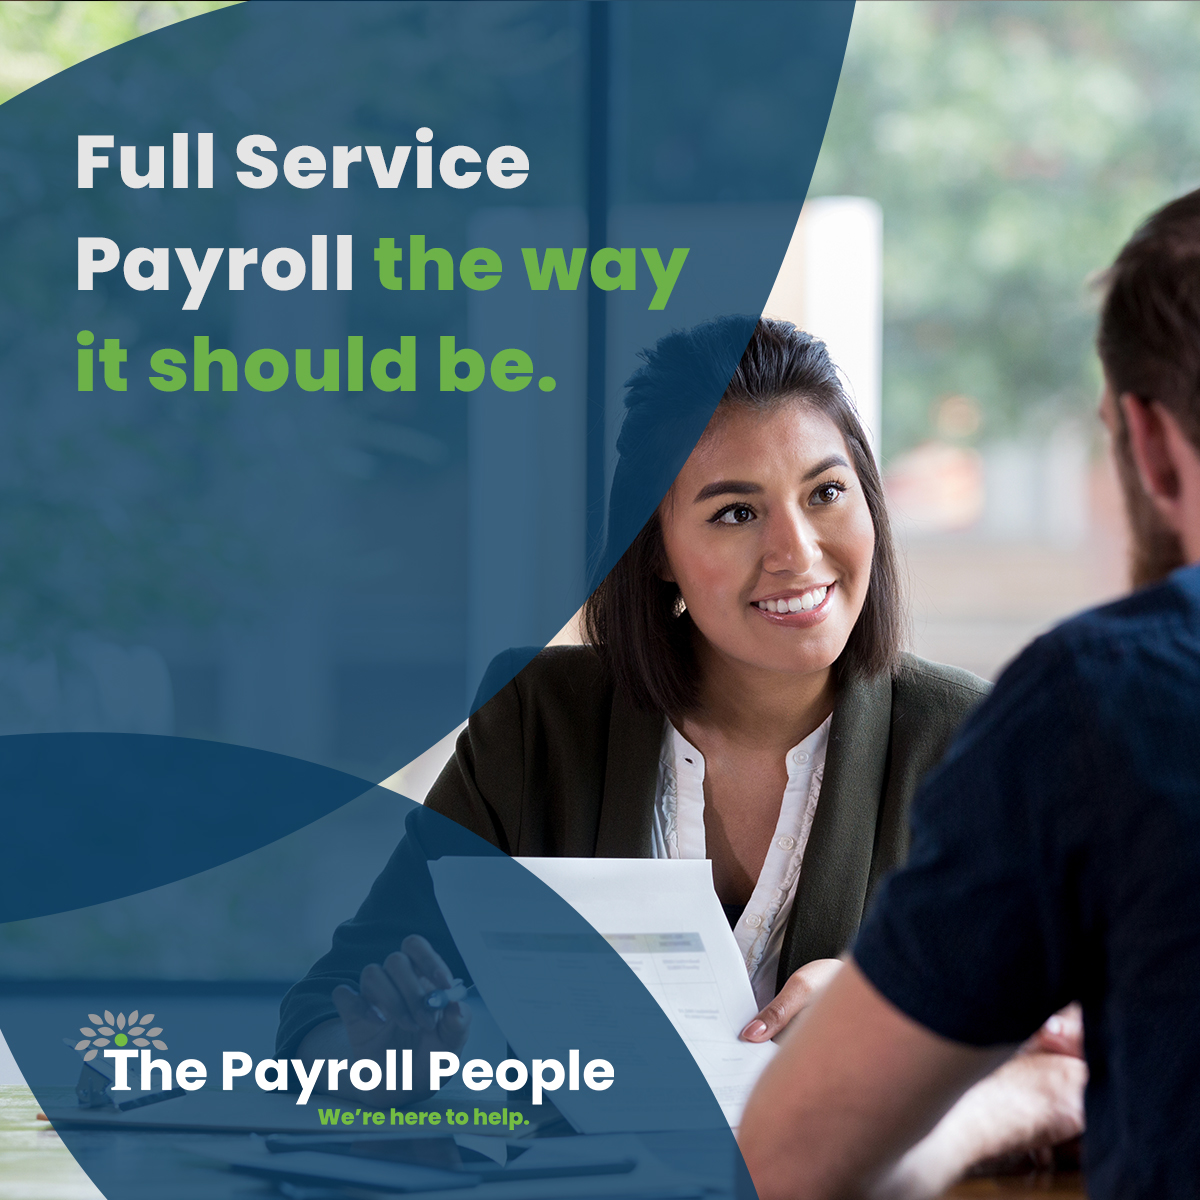 Social Media Post designed for The Payroll People